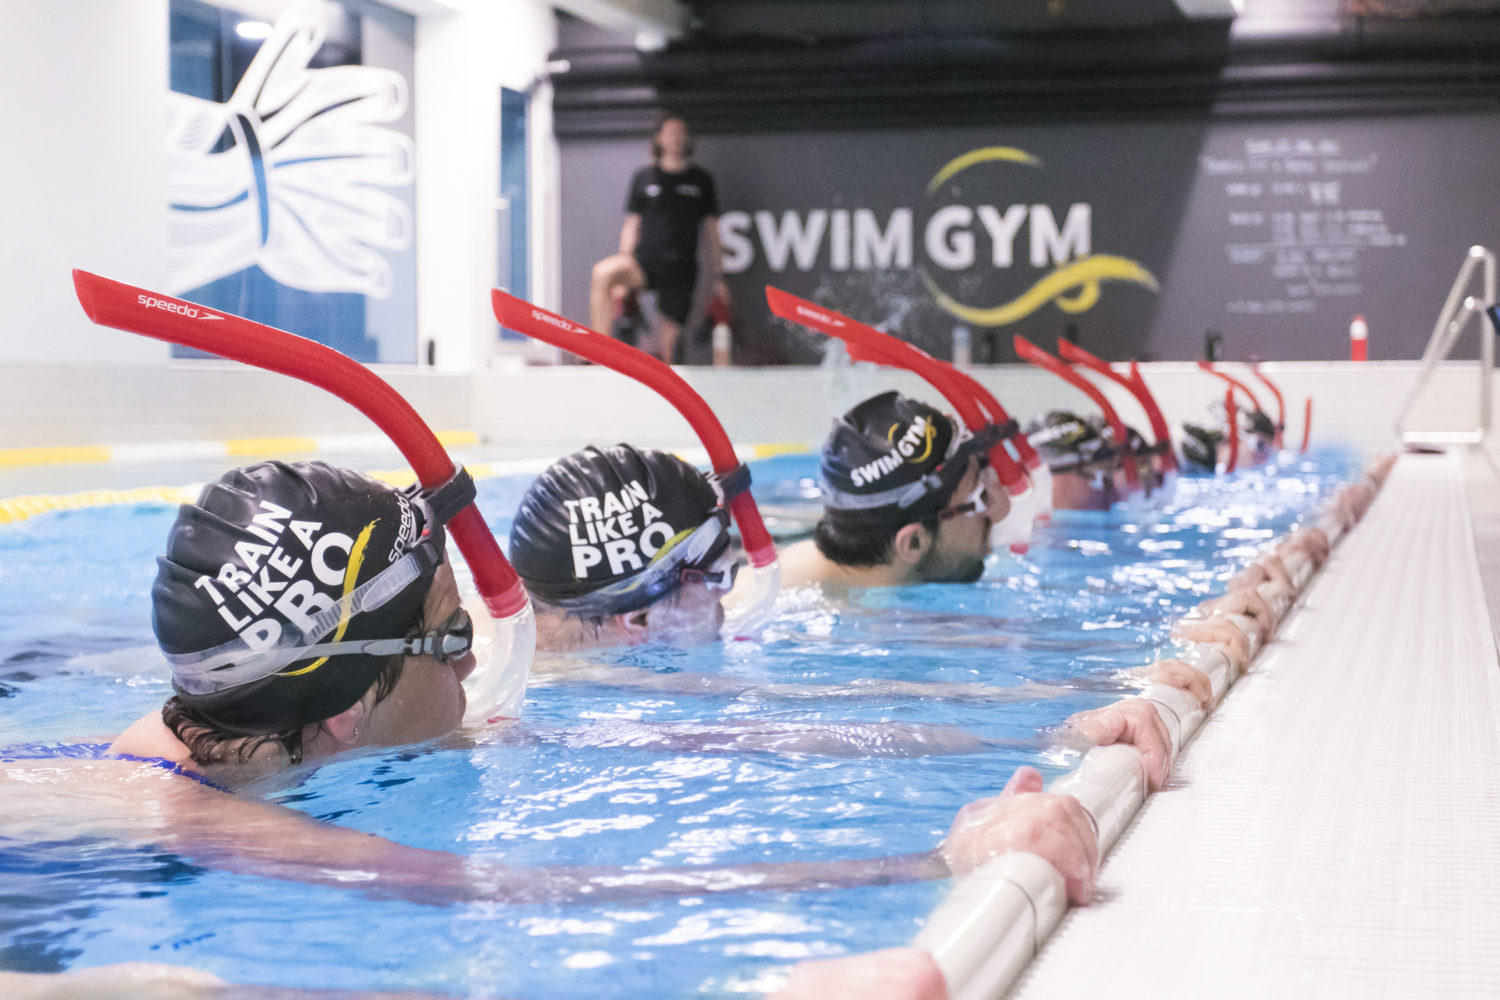 SwimGym Amsterdam is the coaching swimming pool where swimmers & triathletes can train under professional guidance. Train Like A Pro.